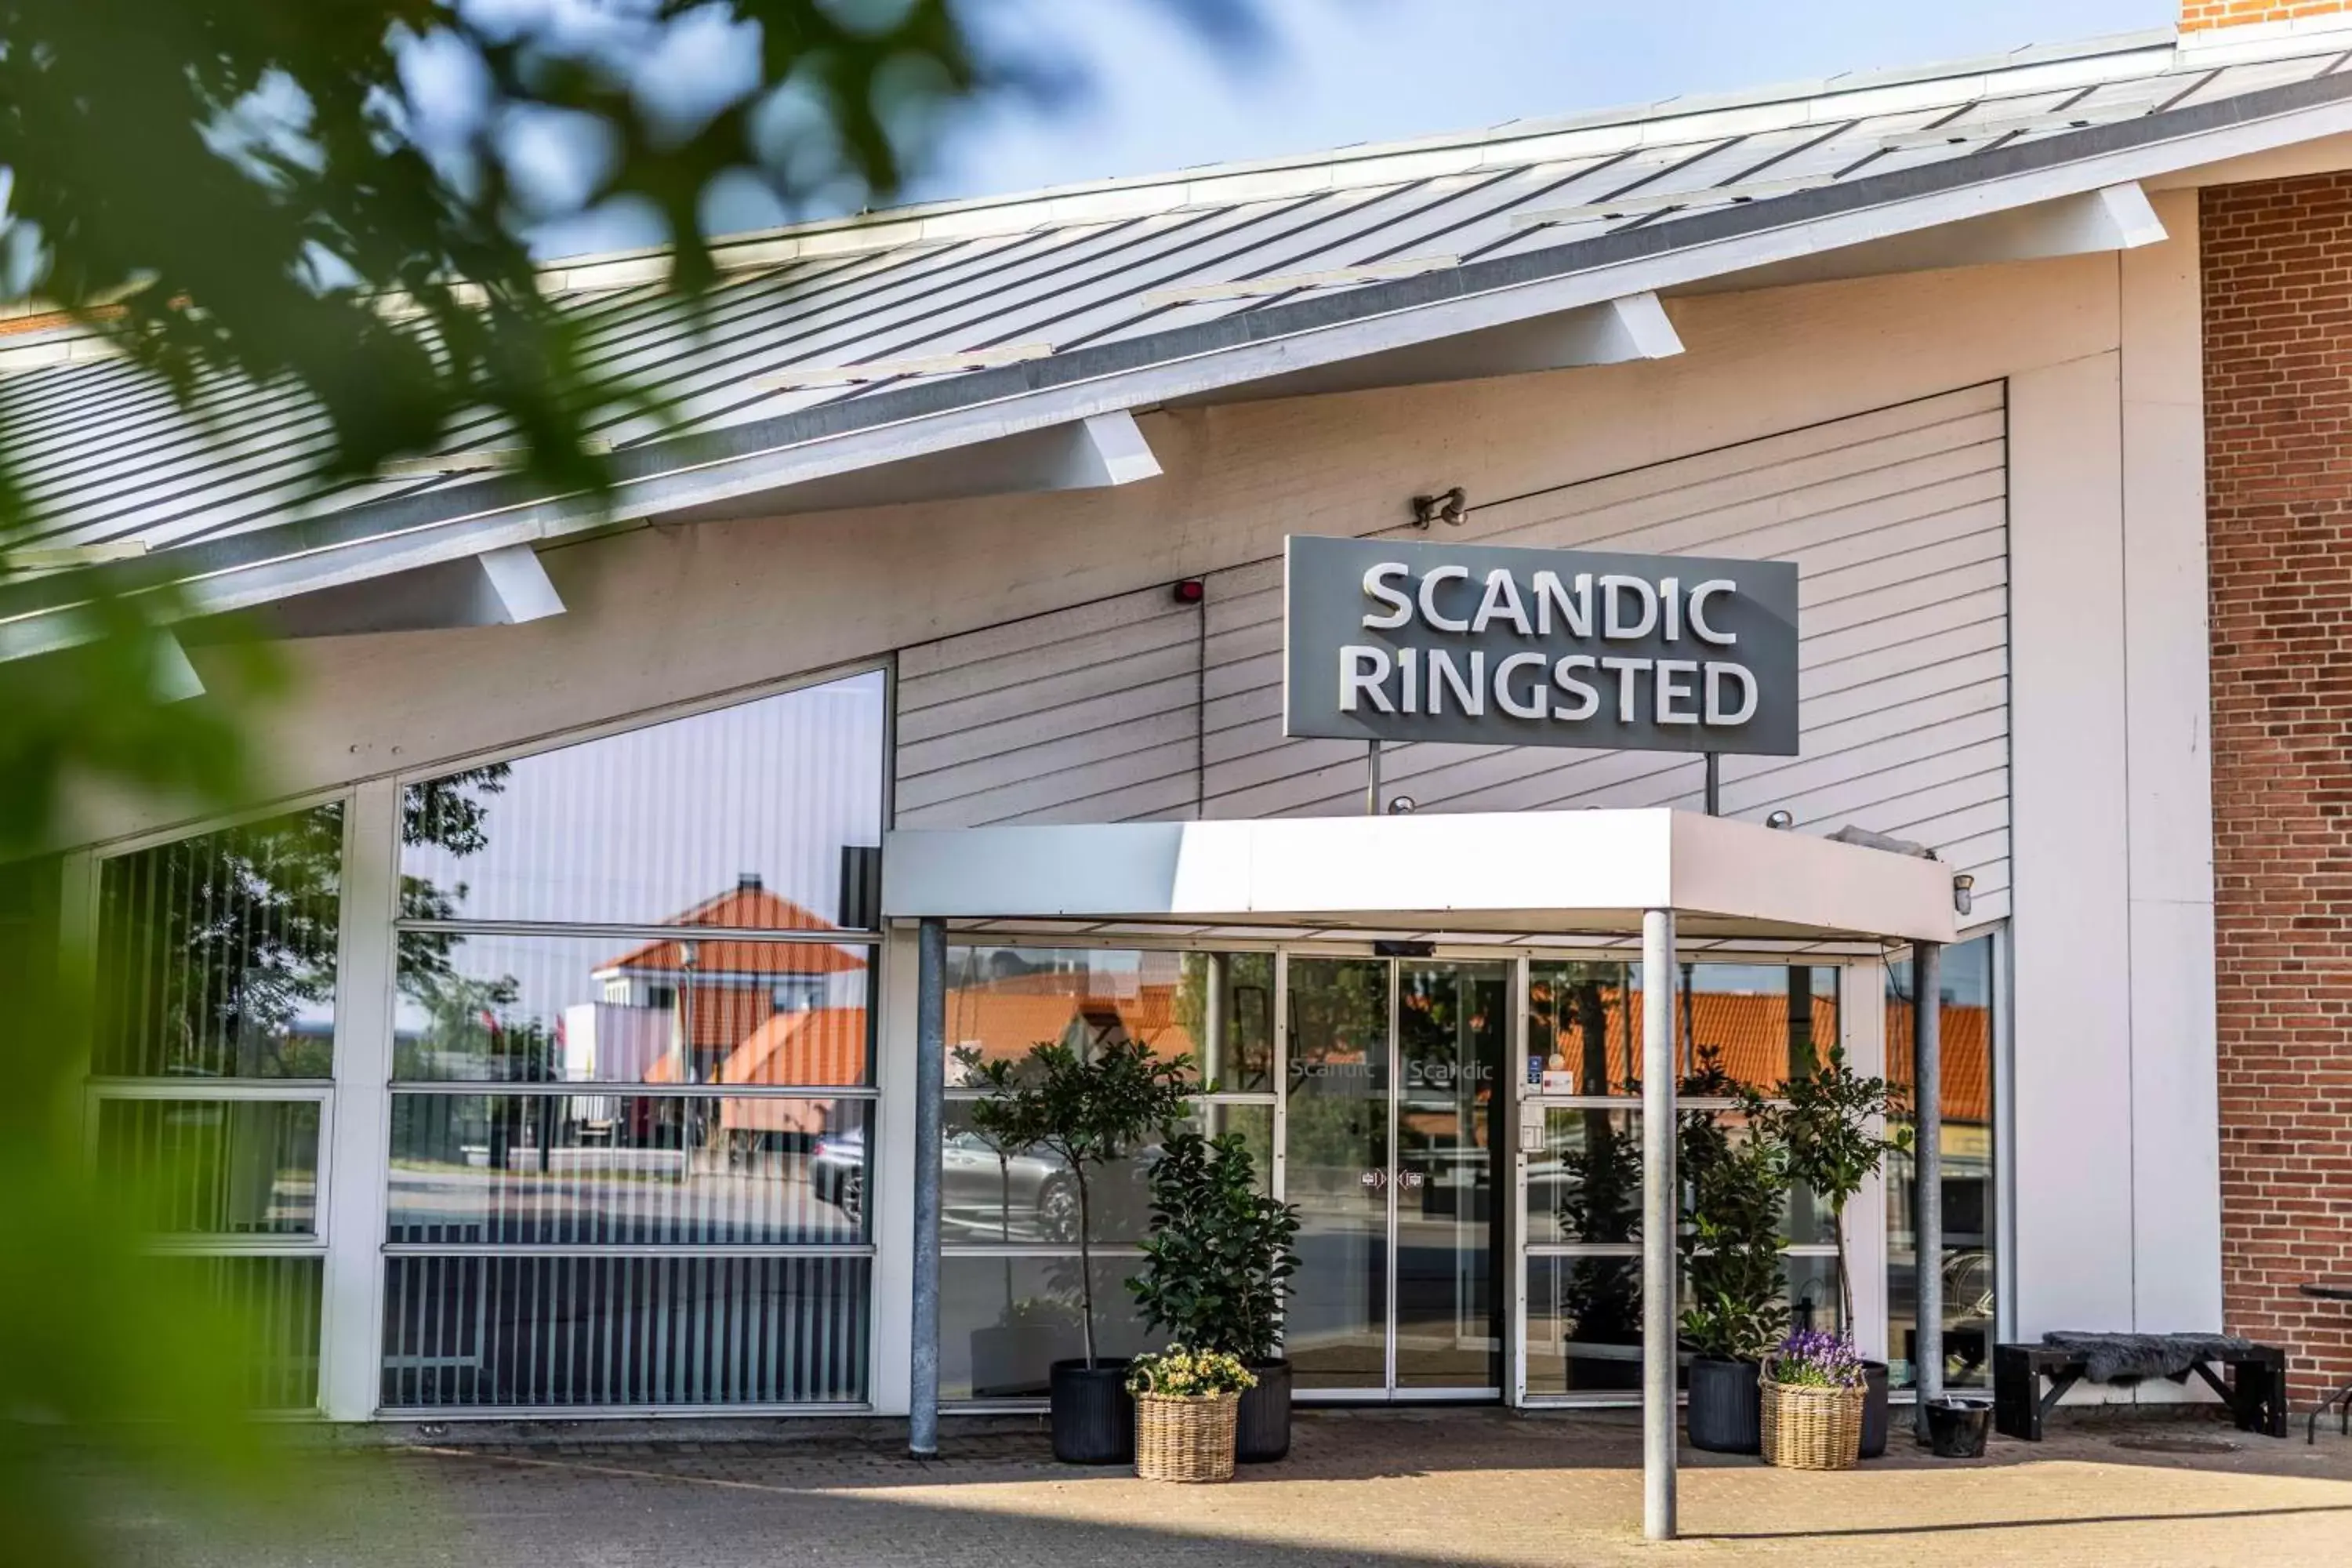 Property building in Scandic Ringsted